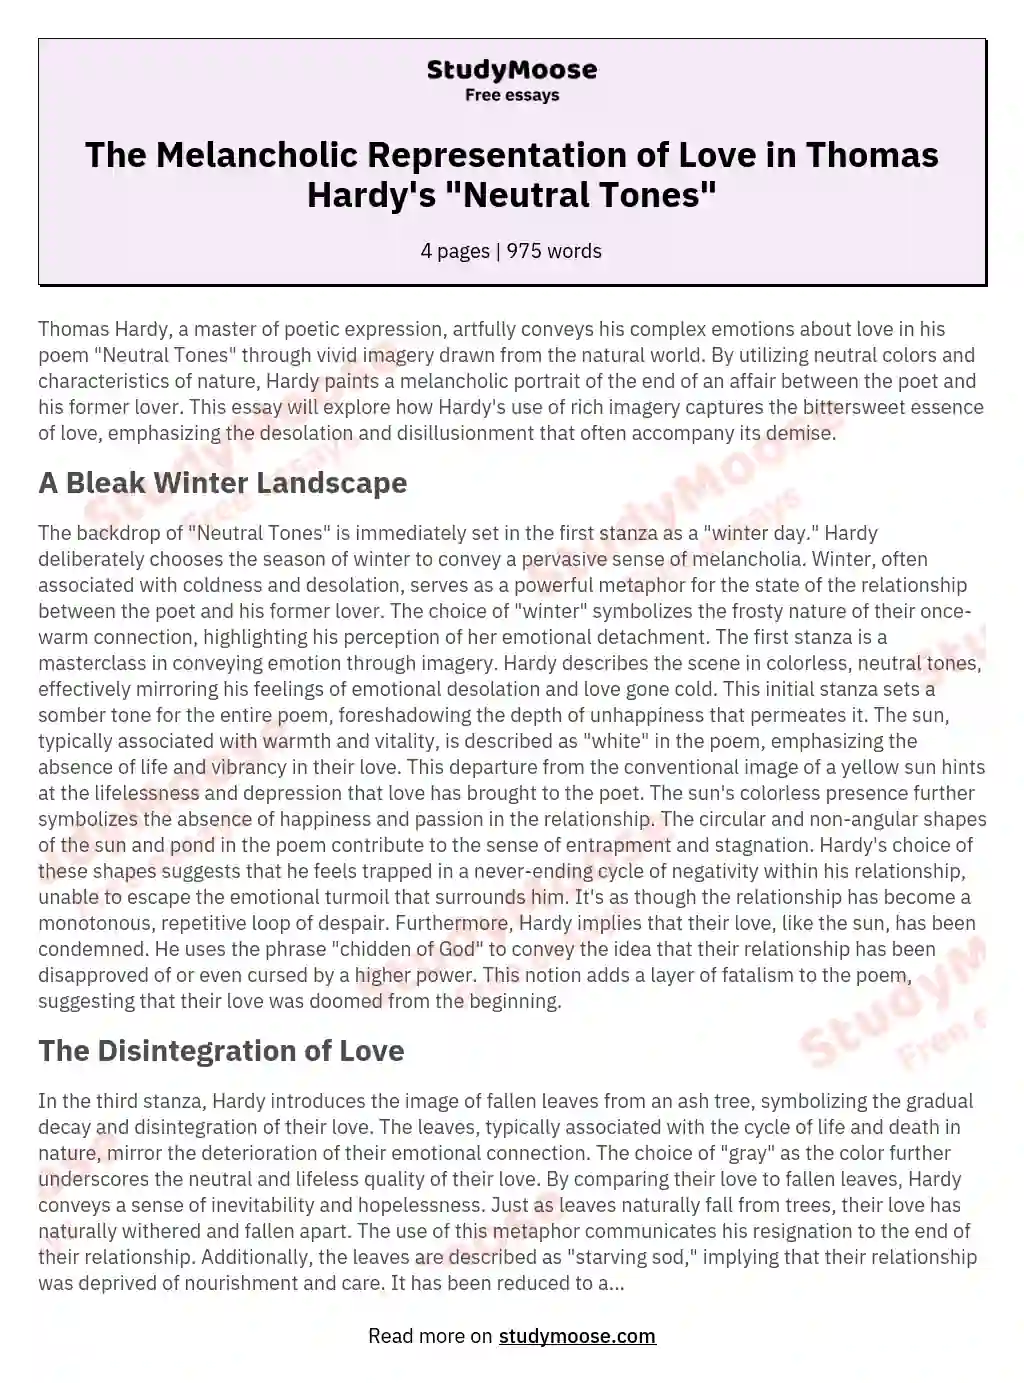 Symbolism in Hardy's Neutral Tones